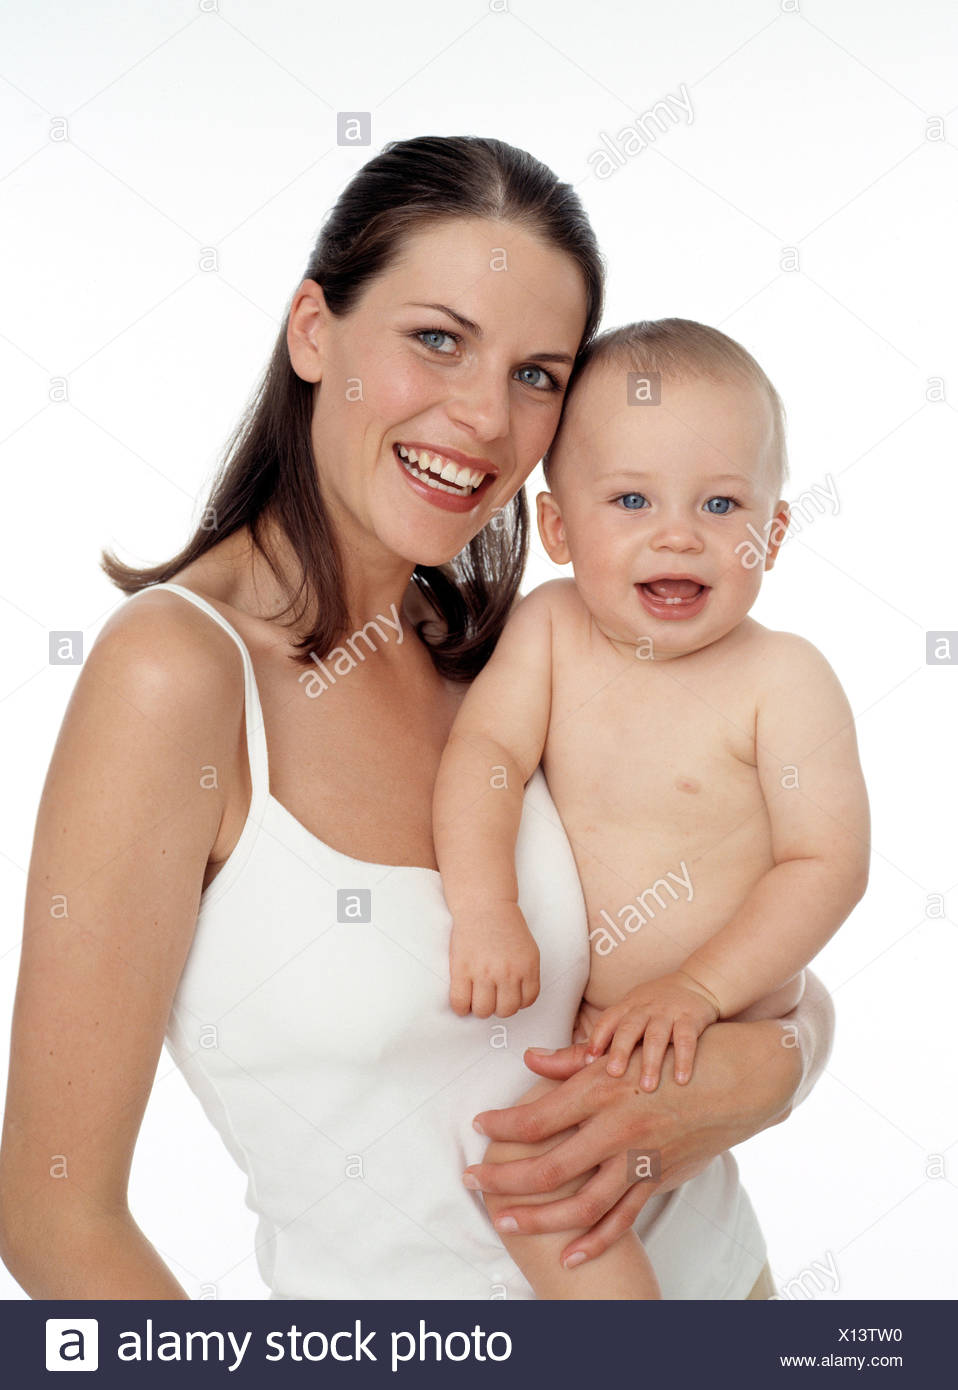 holding baby on hip